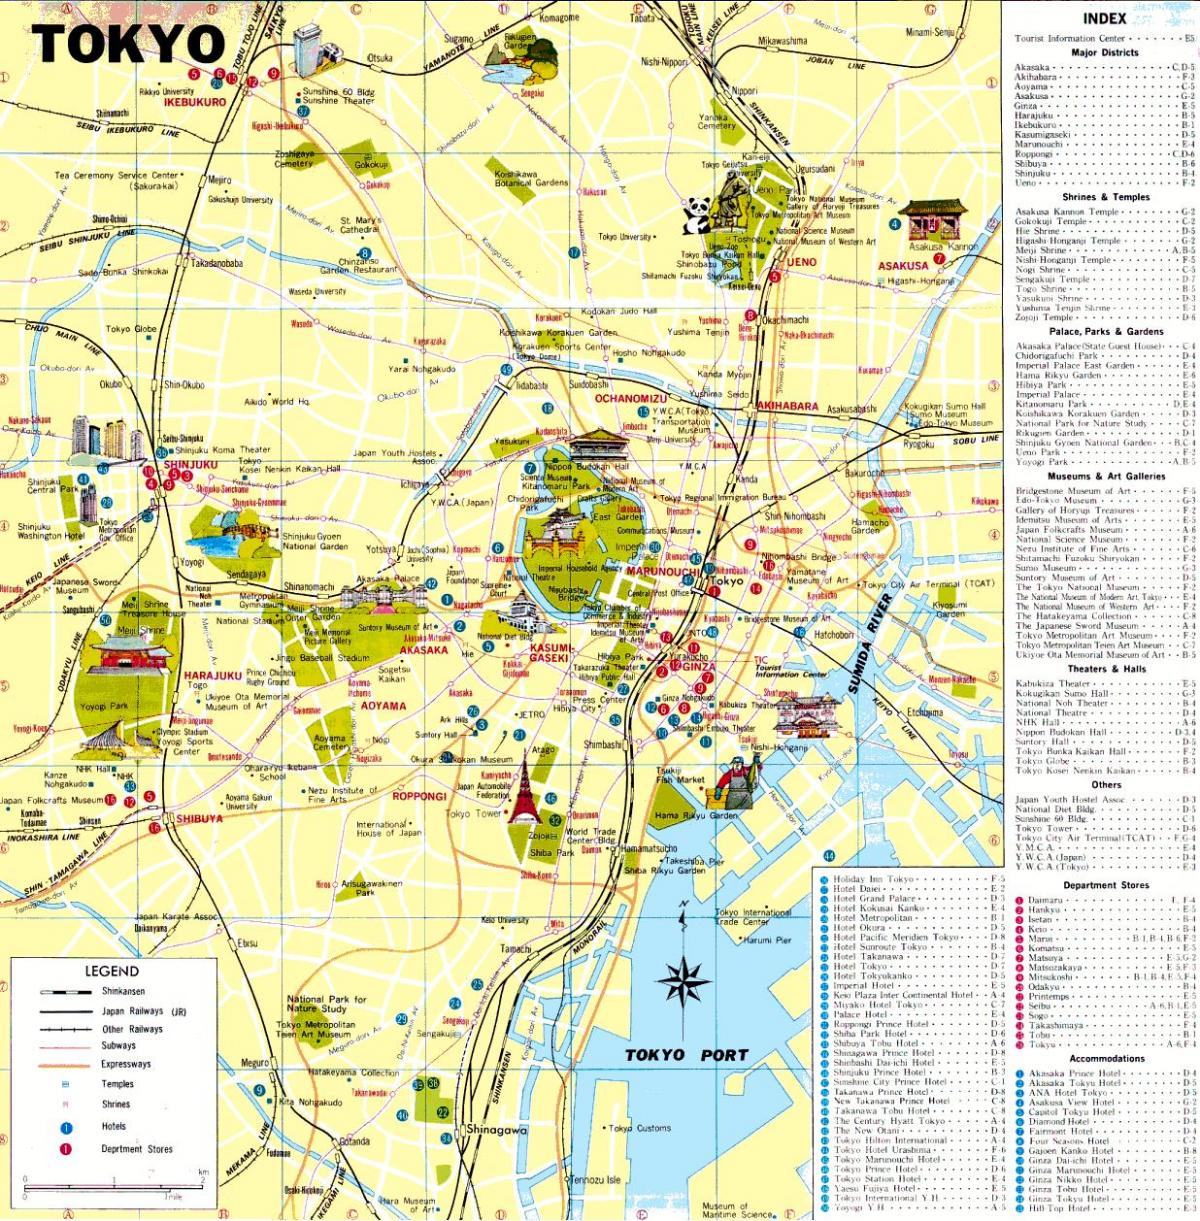 Tokyo map for tourist